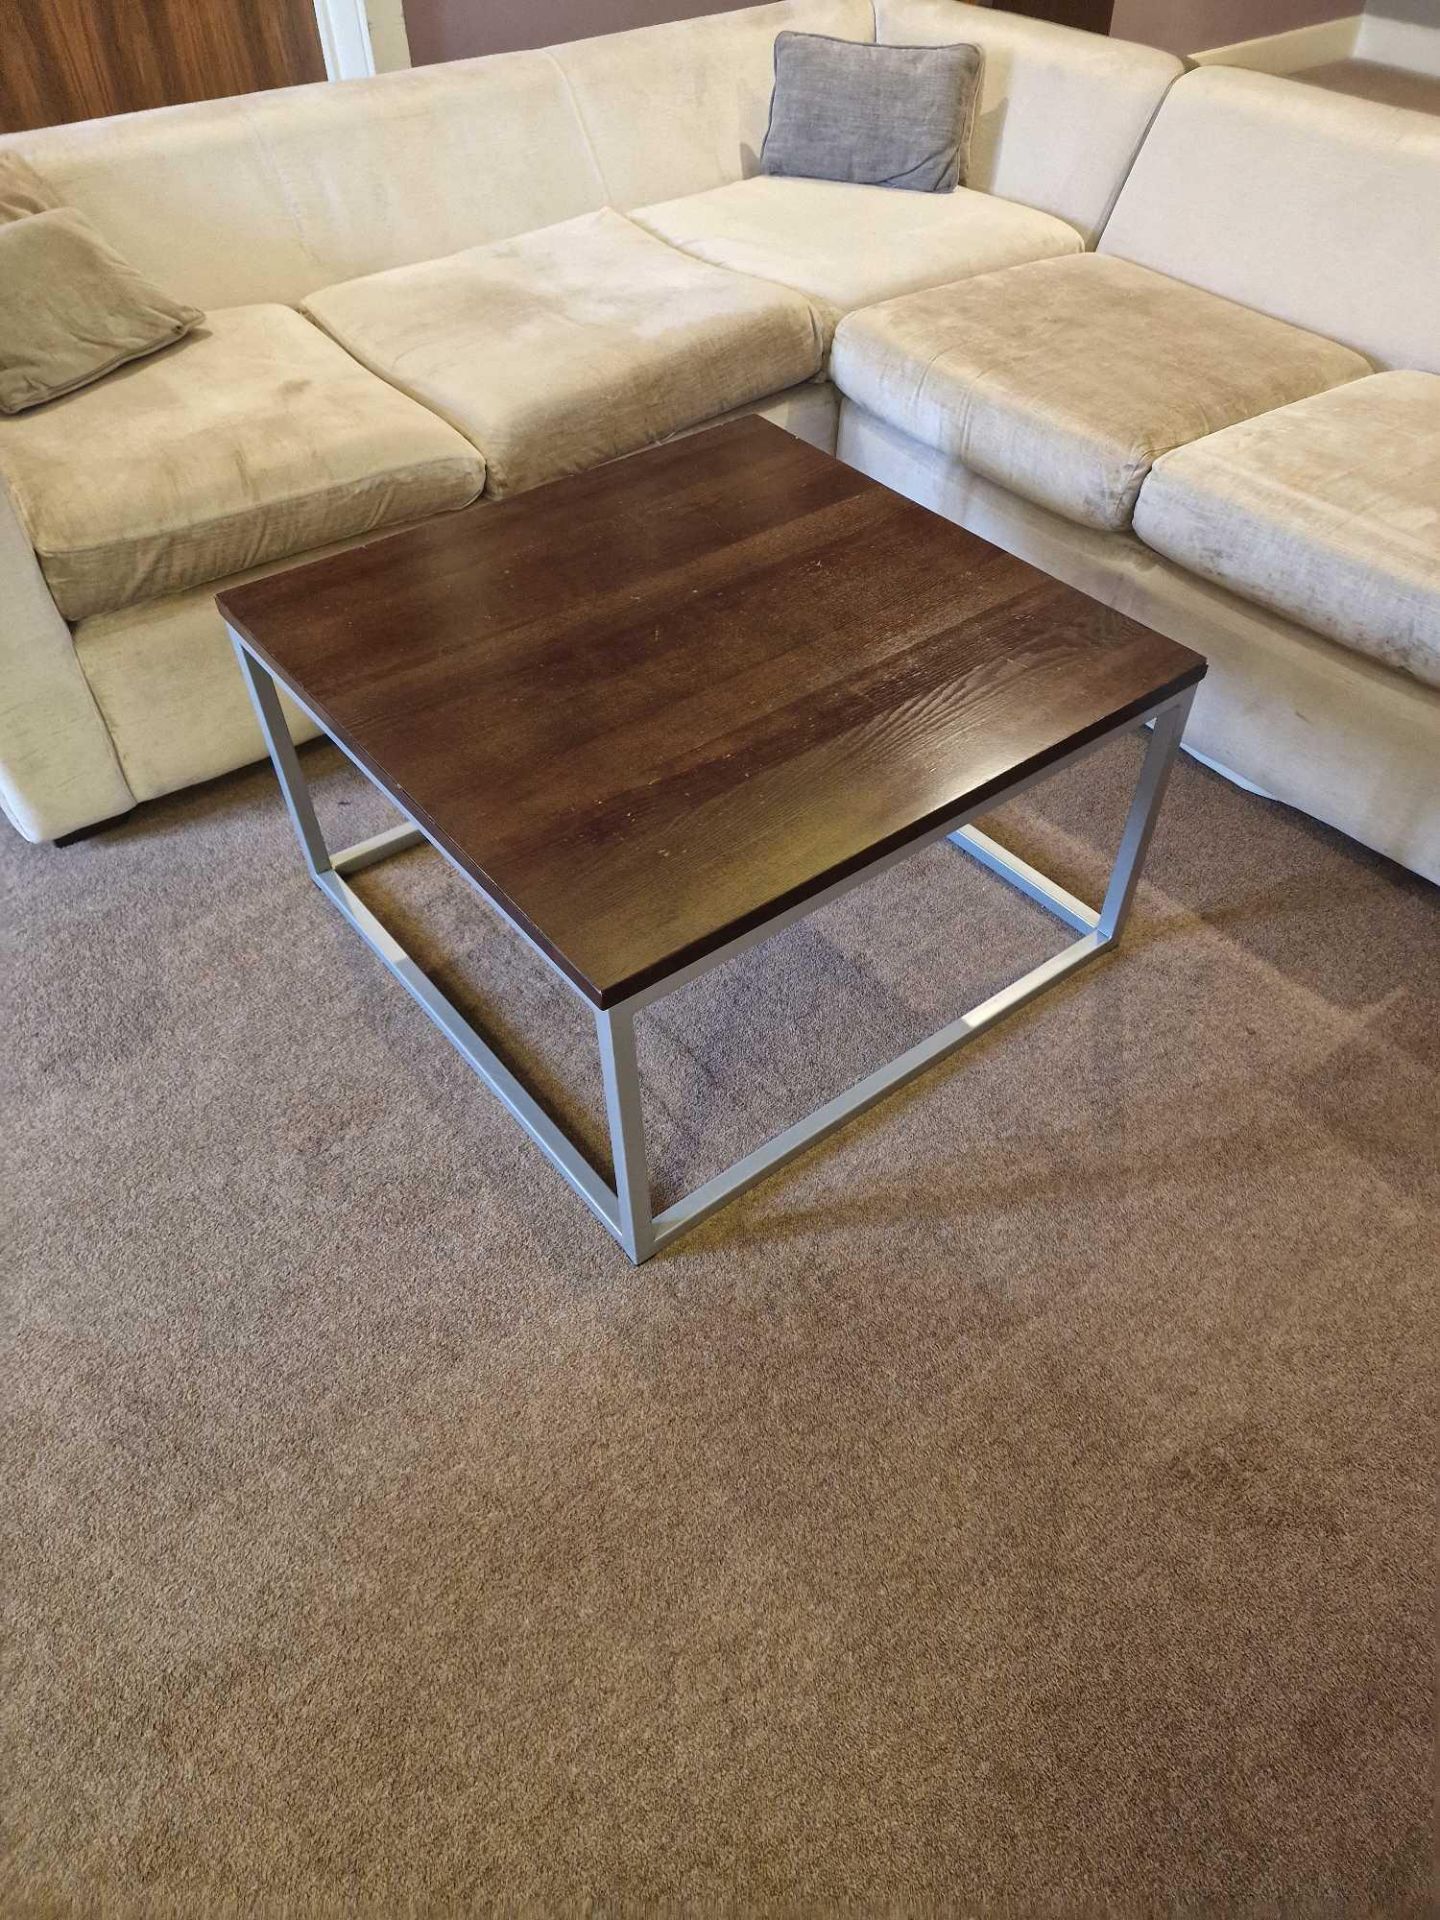 A wood top metal frame coffee table 80 x 80 x 45cm ( Location : 114)